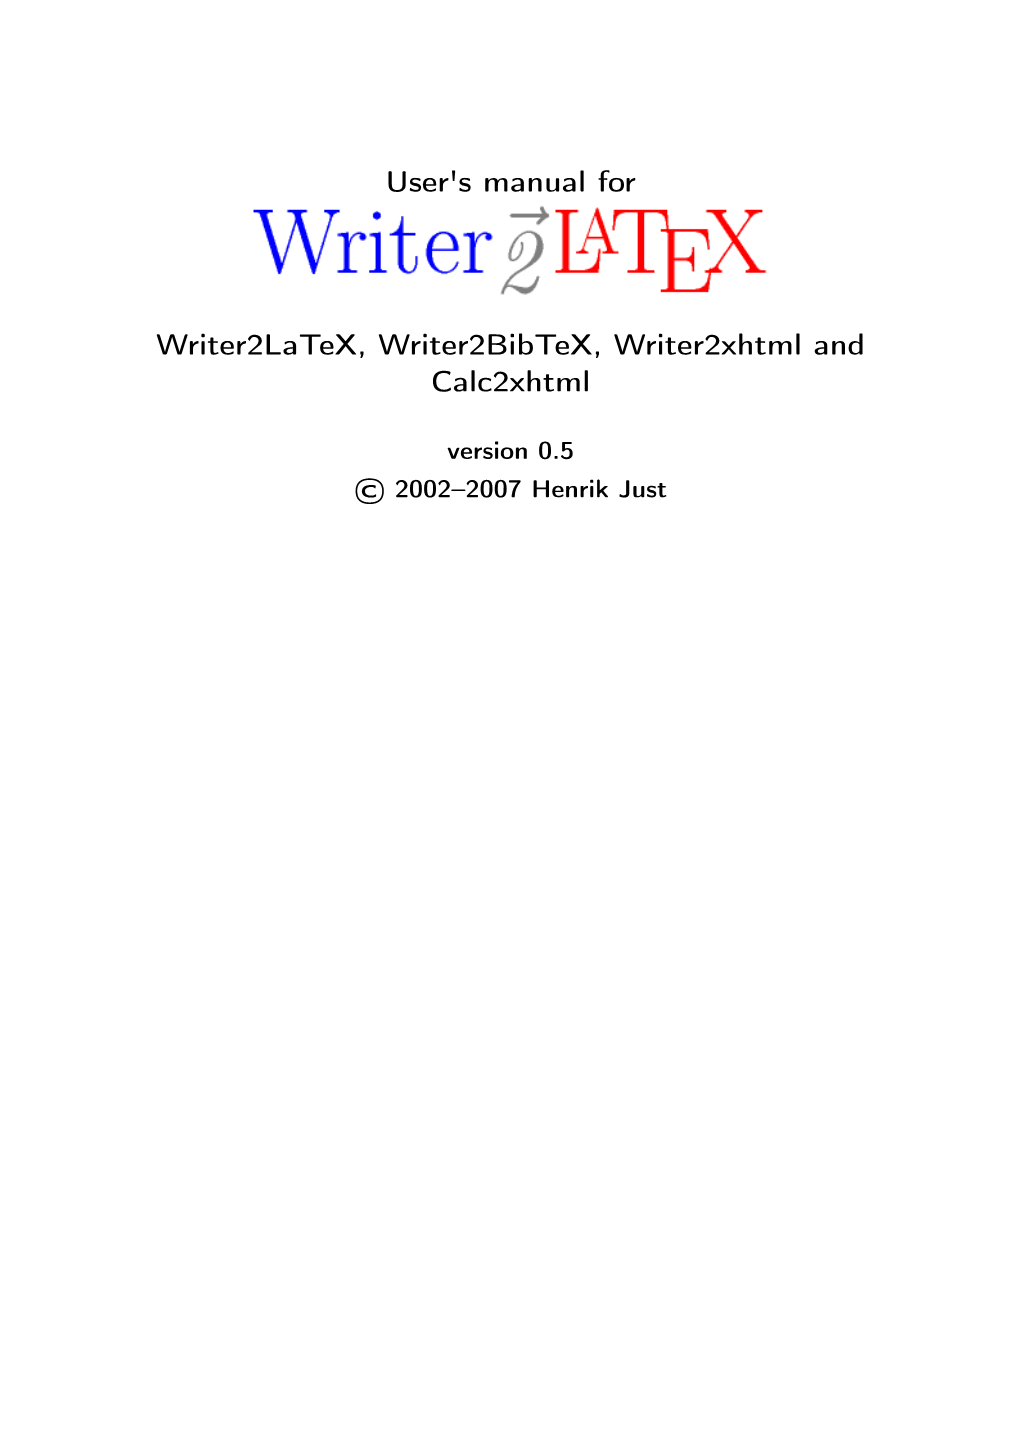 User's Manual for Writer2latex, Writer2bibtex, Writer2xhtml and Calc2xhtml